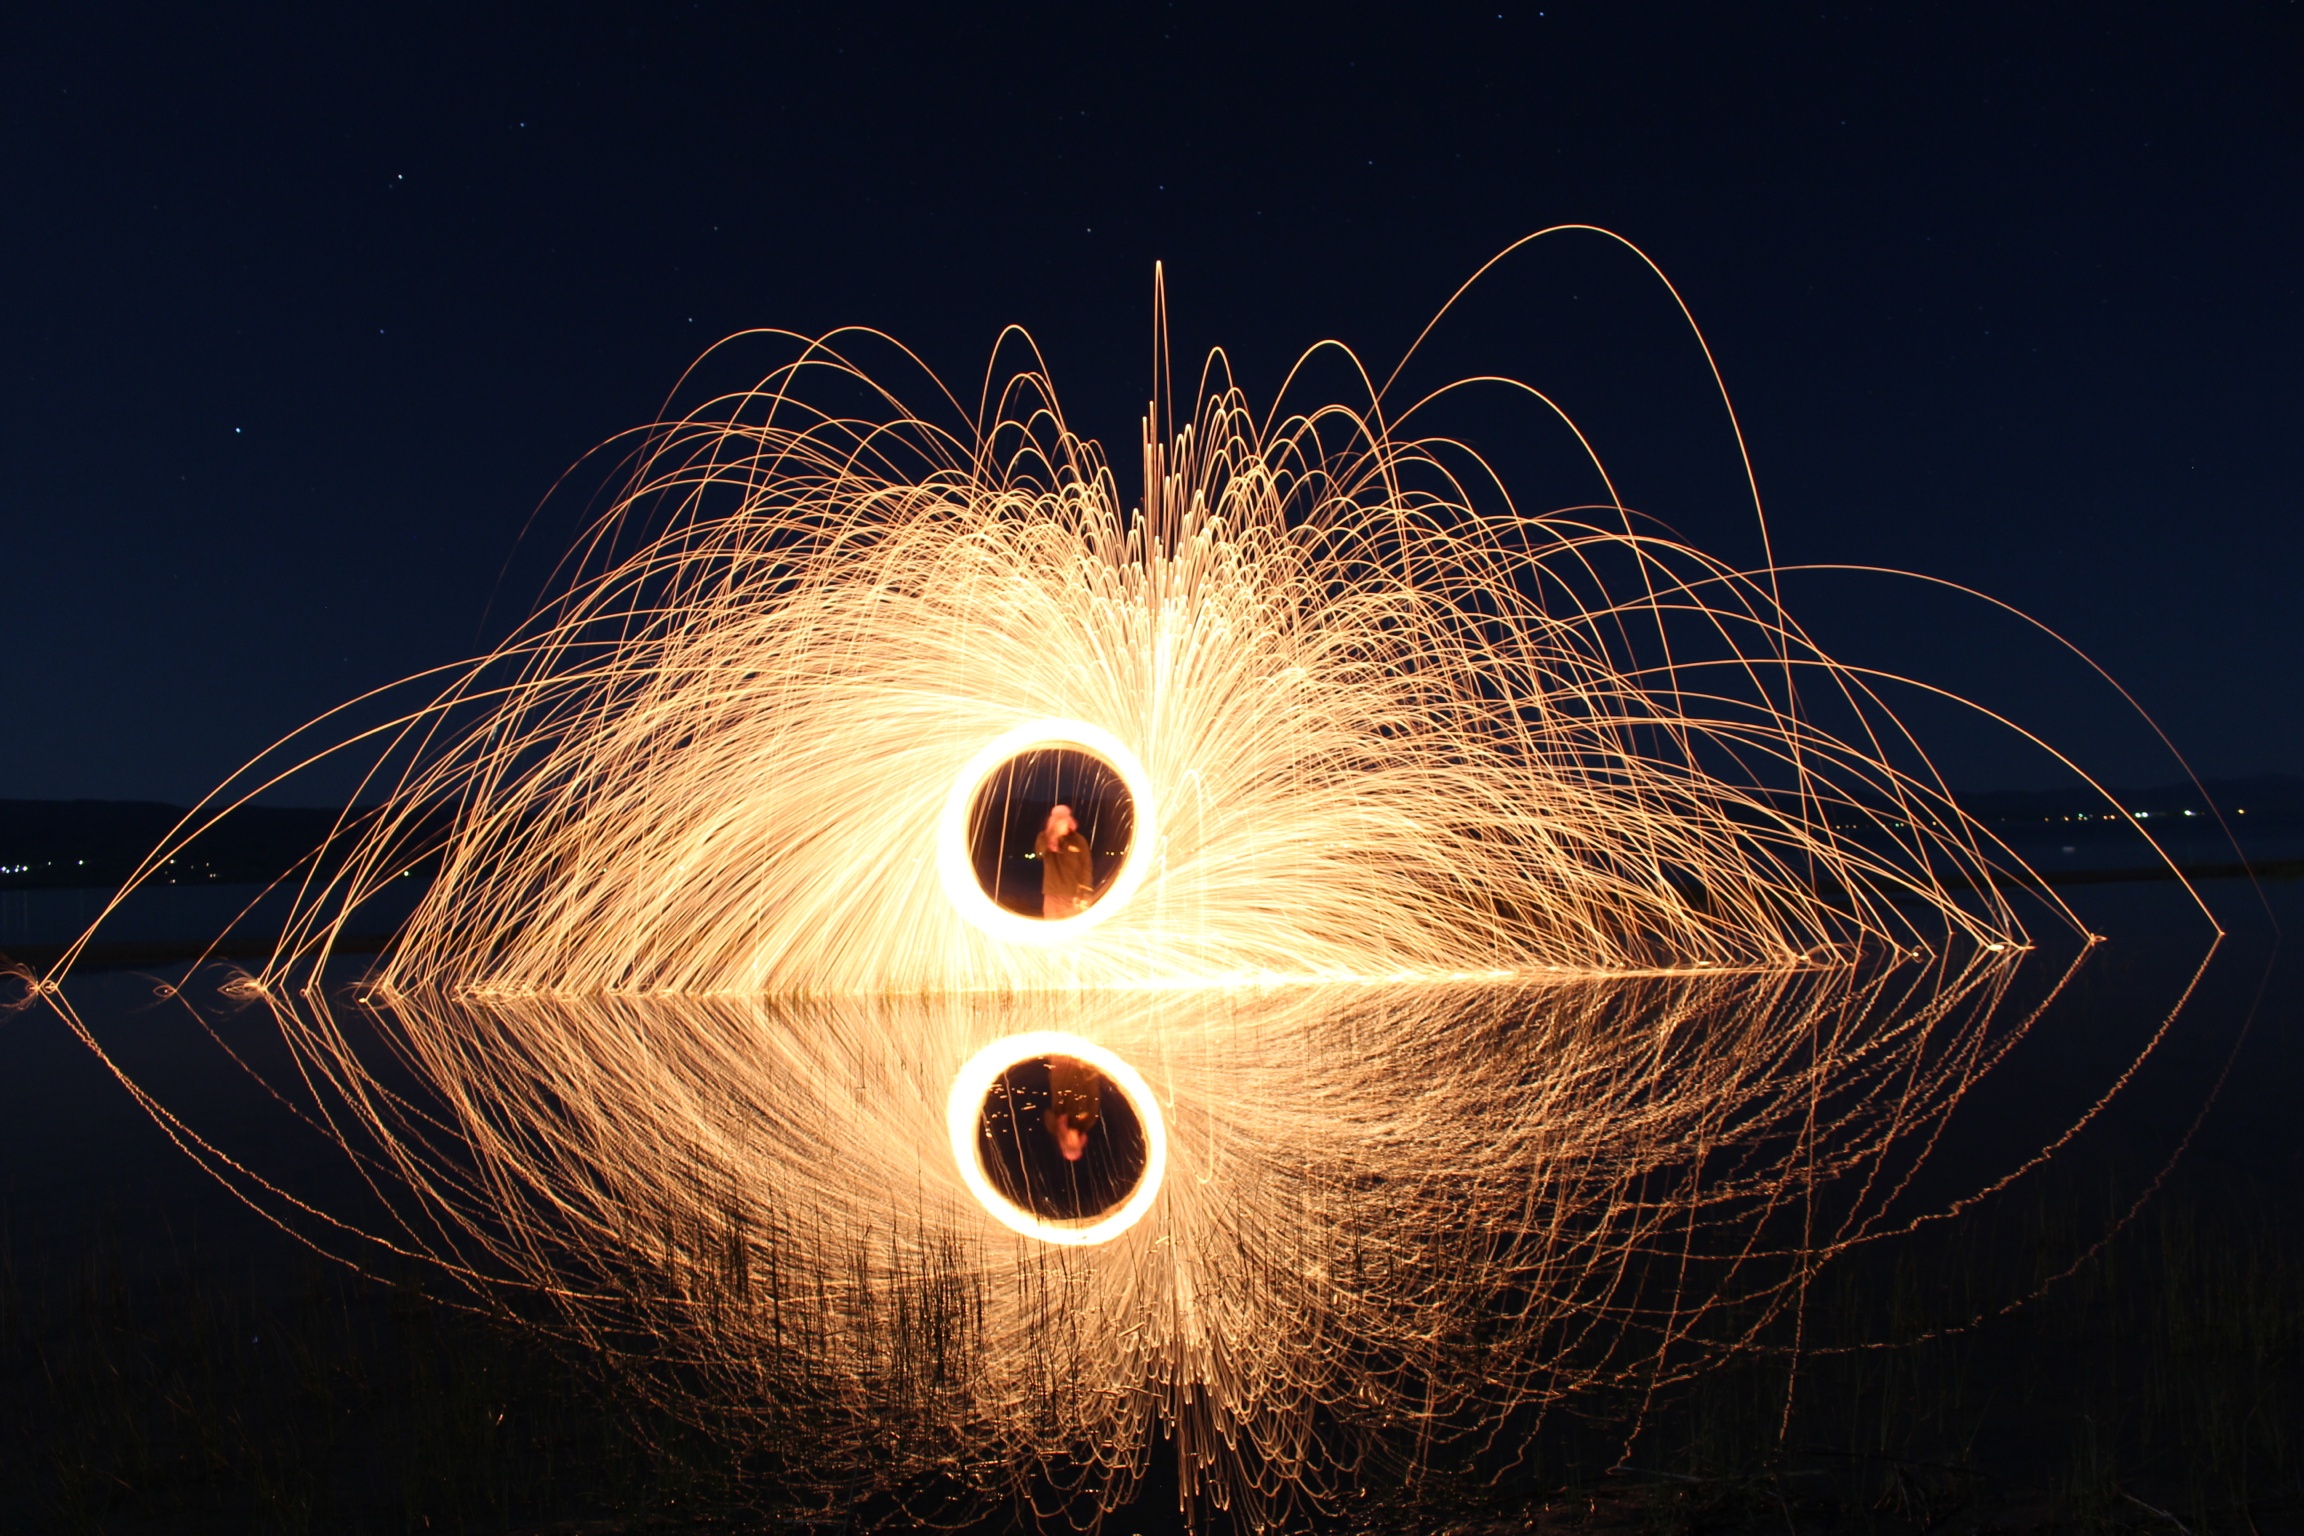 Andy Nichols creates a stunning night image by using a slow shutter speed and flaming steel wool that he lit on fire and spun around in circles over a lake. 